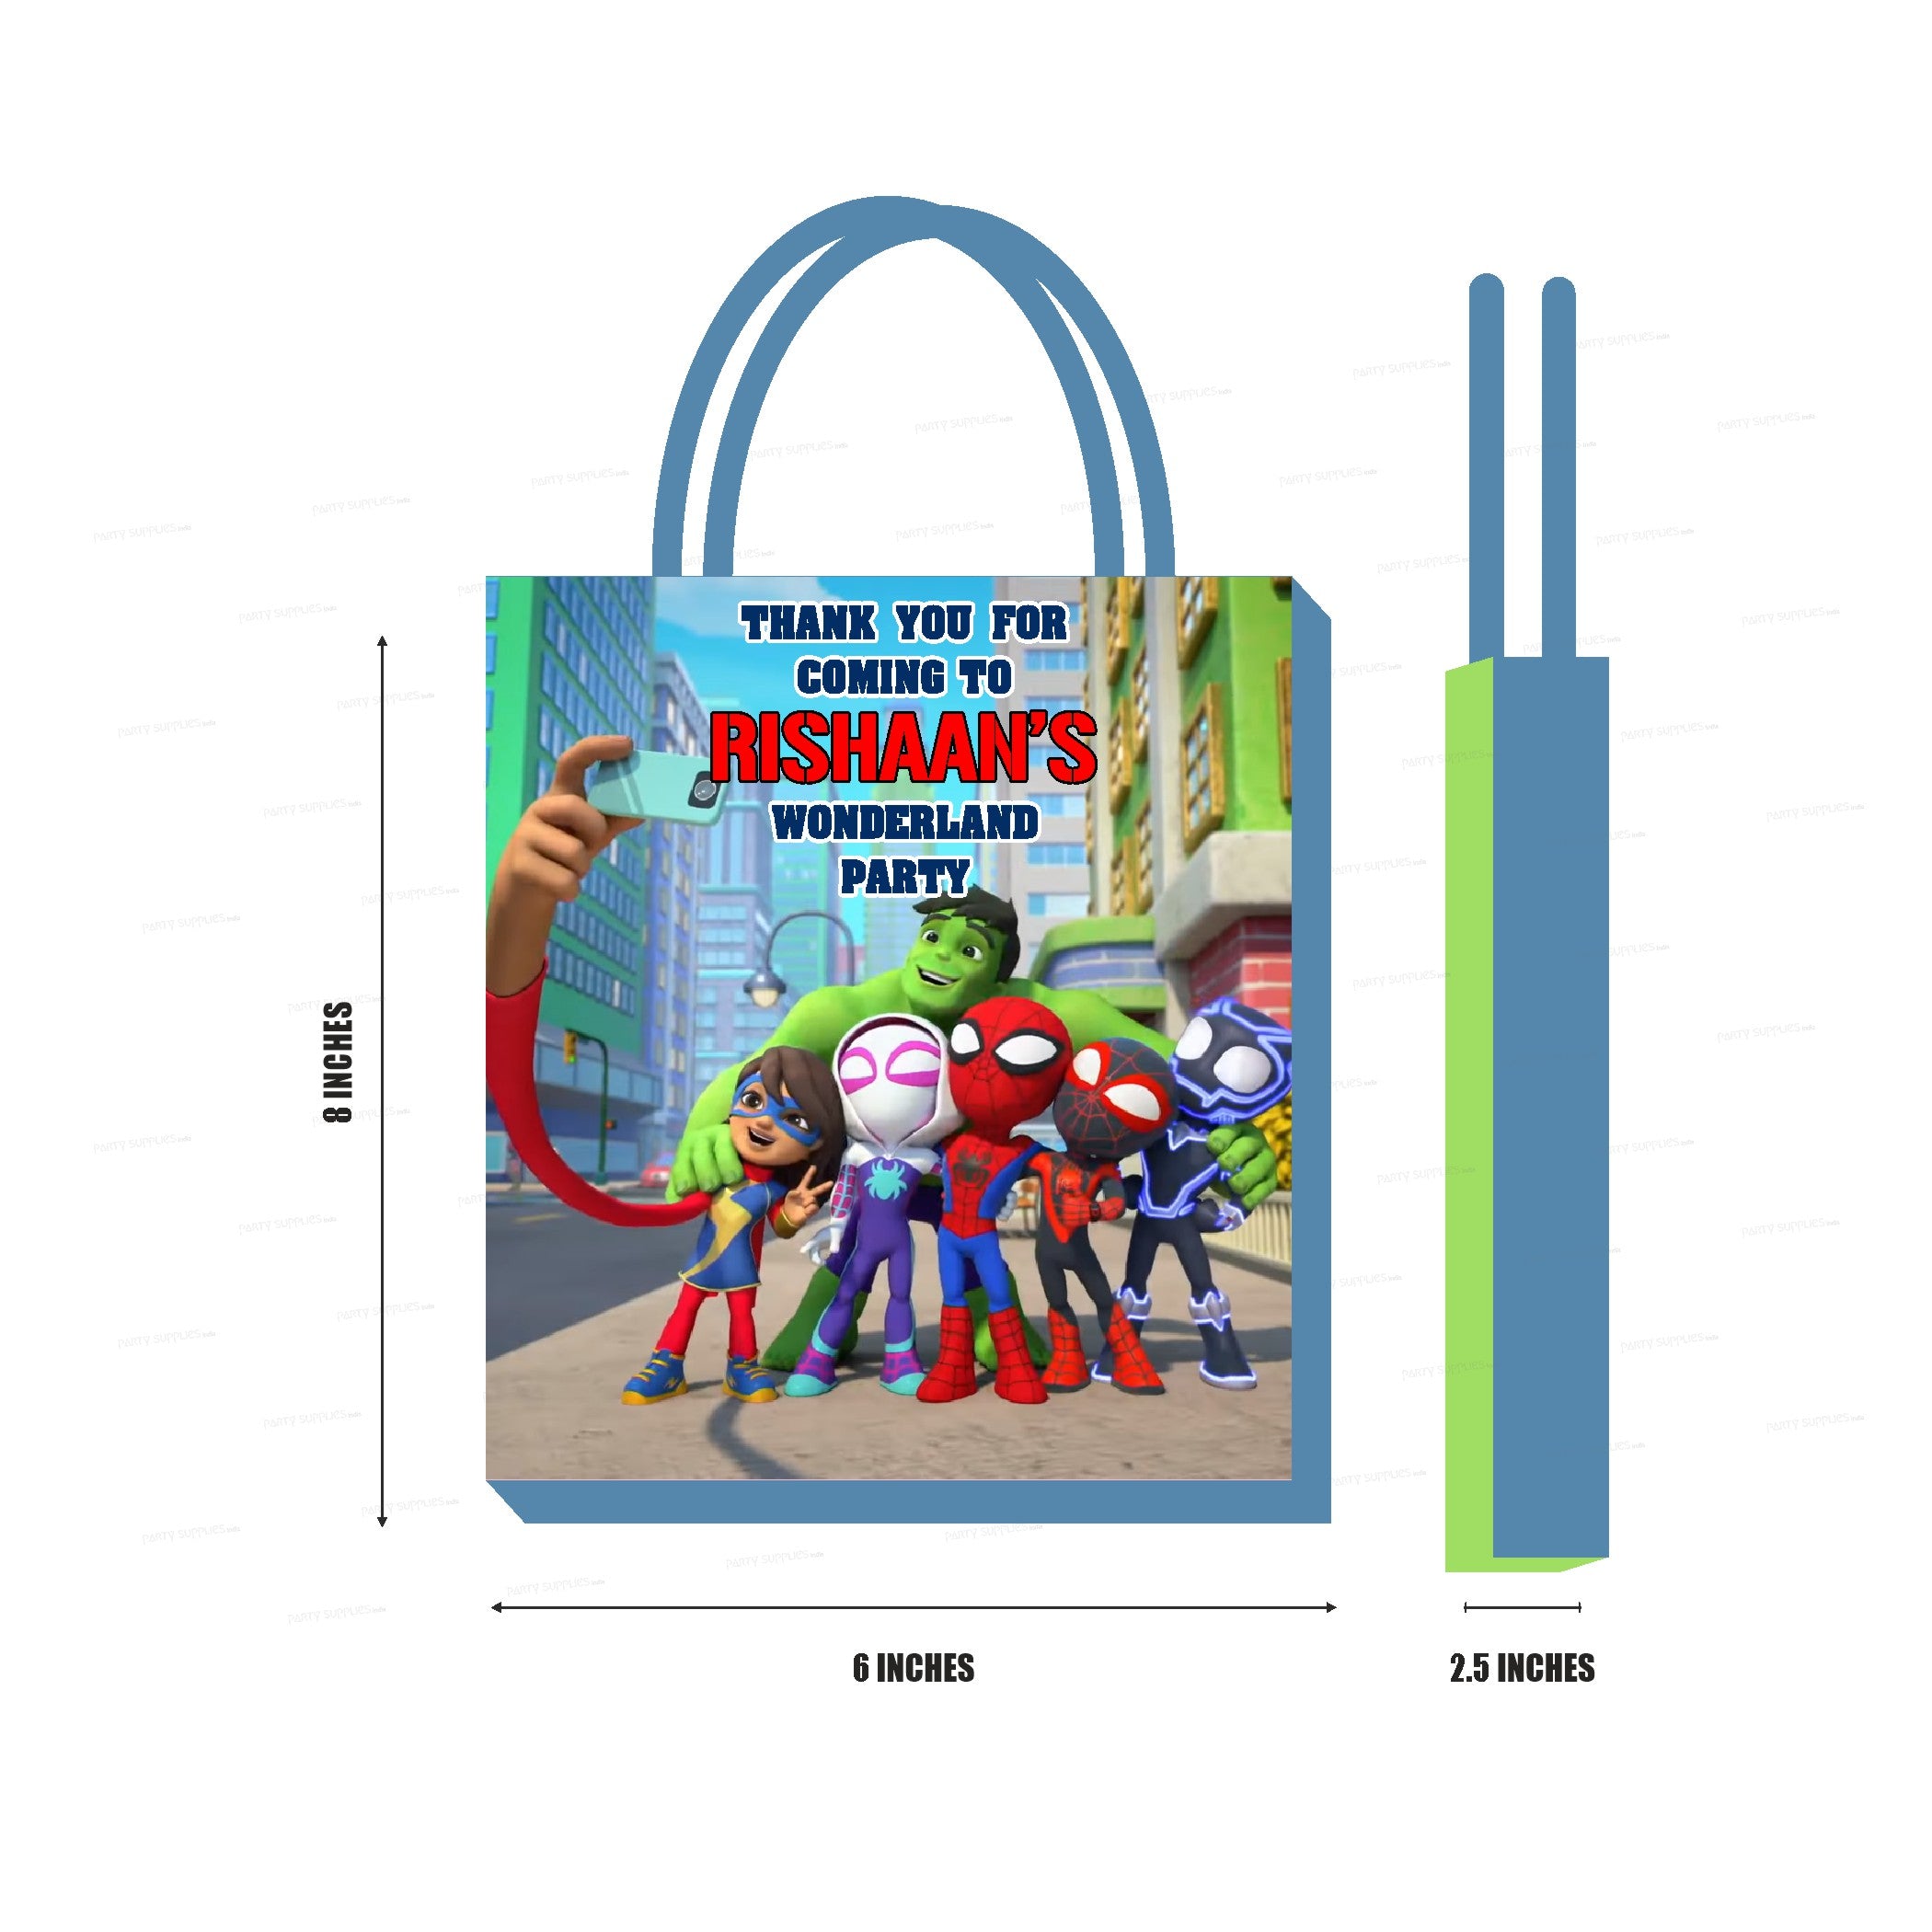 PSI Spidey and his Amazing Friends Theme Return Gift Bag